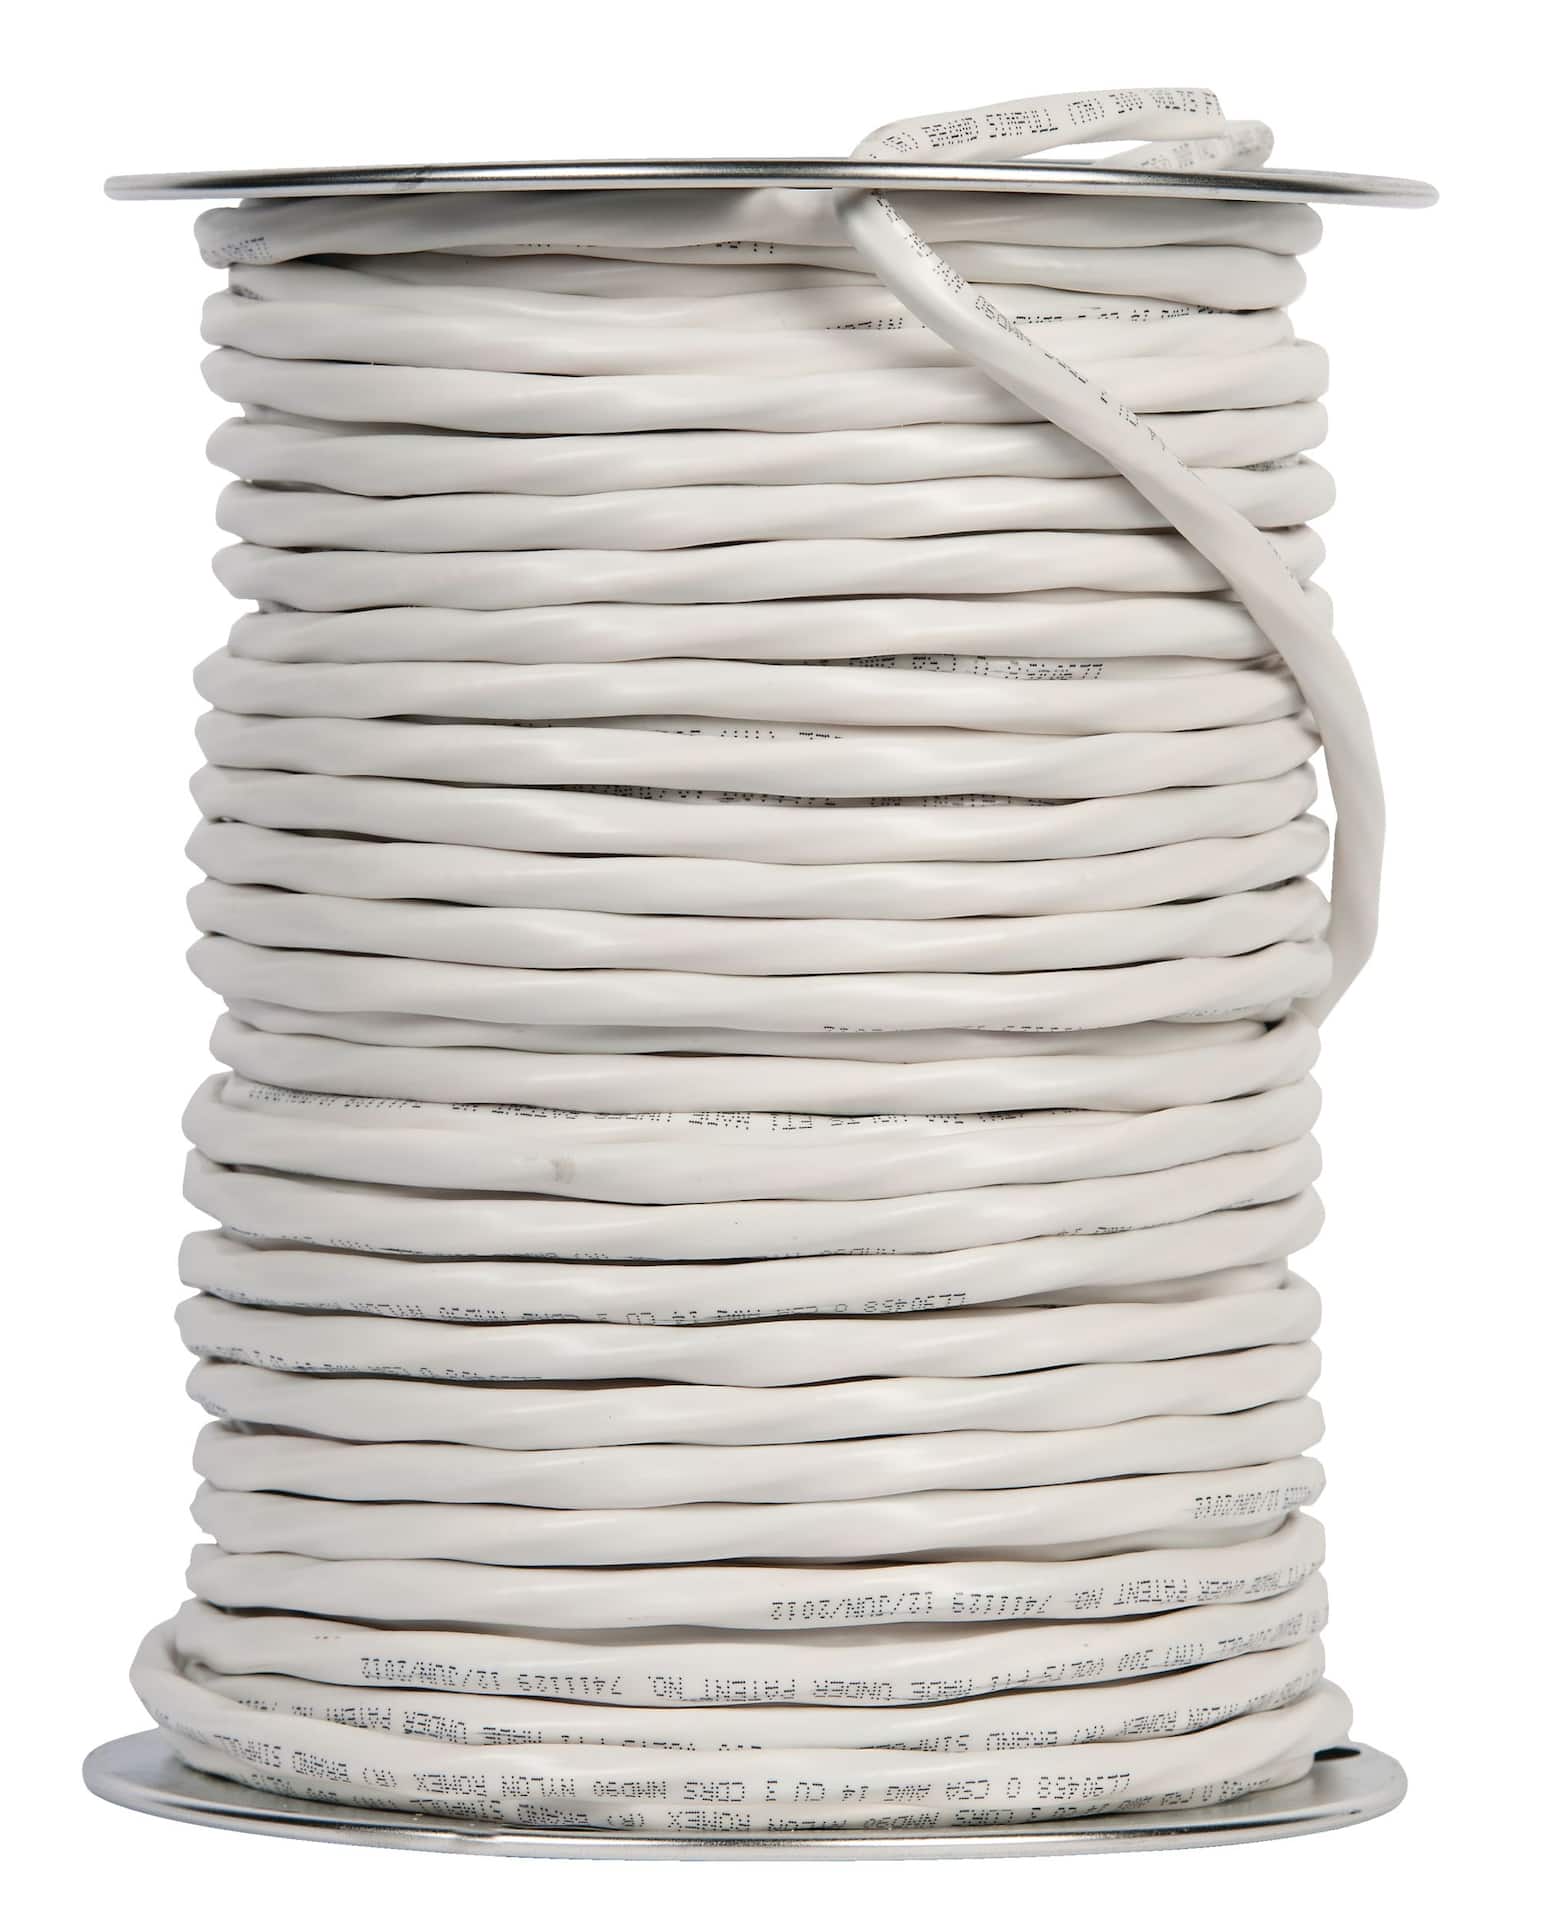 Southwire 47179776 Romex SIMpull NMD90 Electrical Wire, 14/3, White, 246-ft